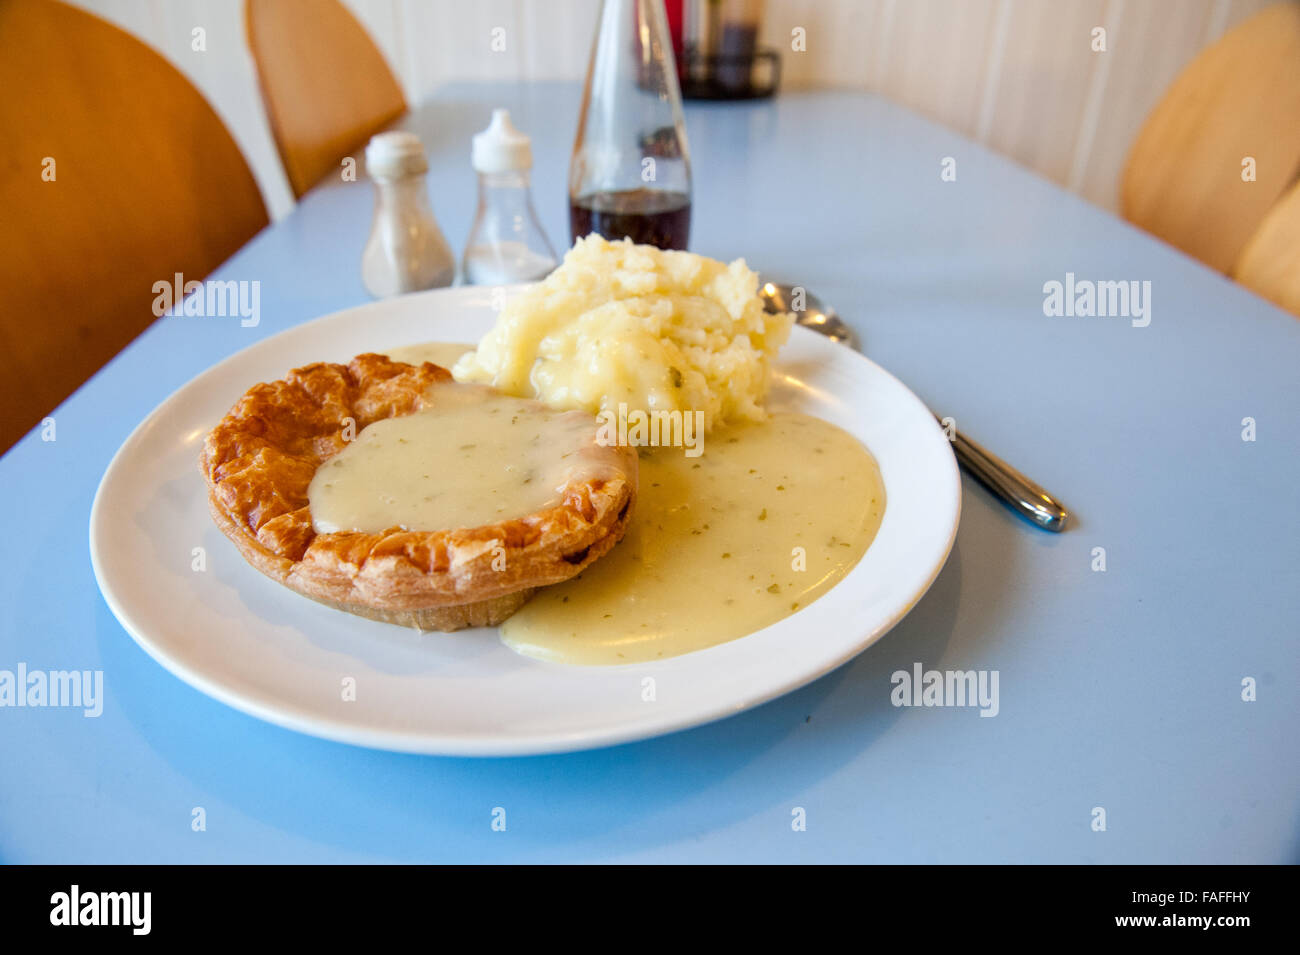 traditional East end of London meal called Pie, Mash and liquor Stock Photo